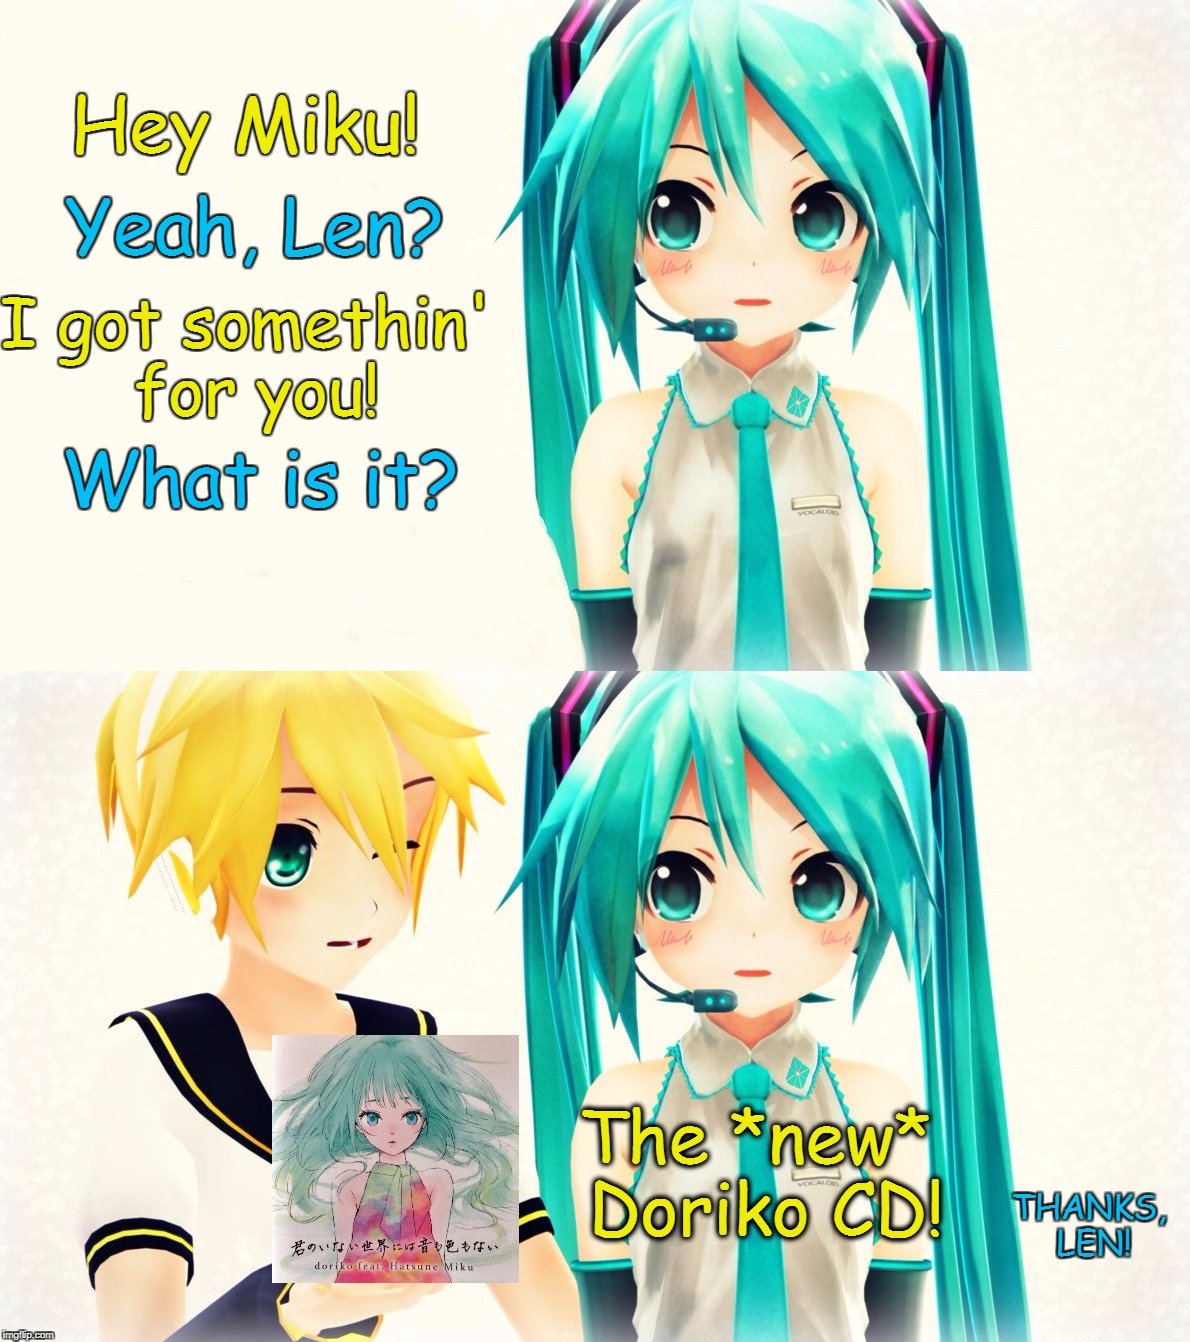 Miku's Present from Len! | Hey Miku! Yeah, Len? I got somethin' for you! What is it? The *new* Doriko CD! THANKS, LEN! | image tagged in hatsune miku,vocaloid,anime,doriko,music | made w/ Imgflip meme maker